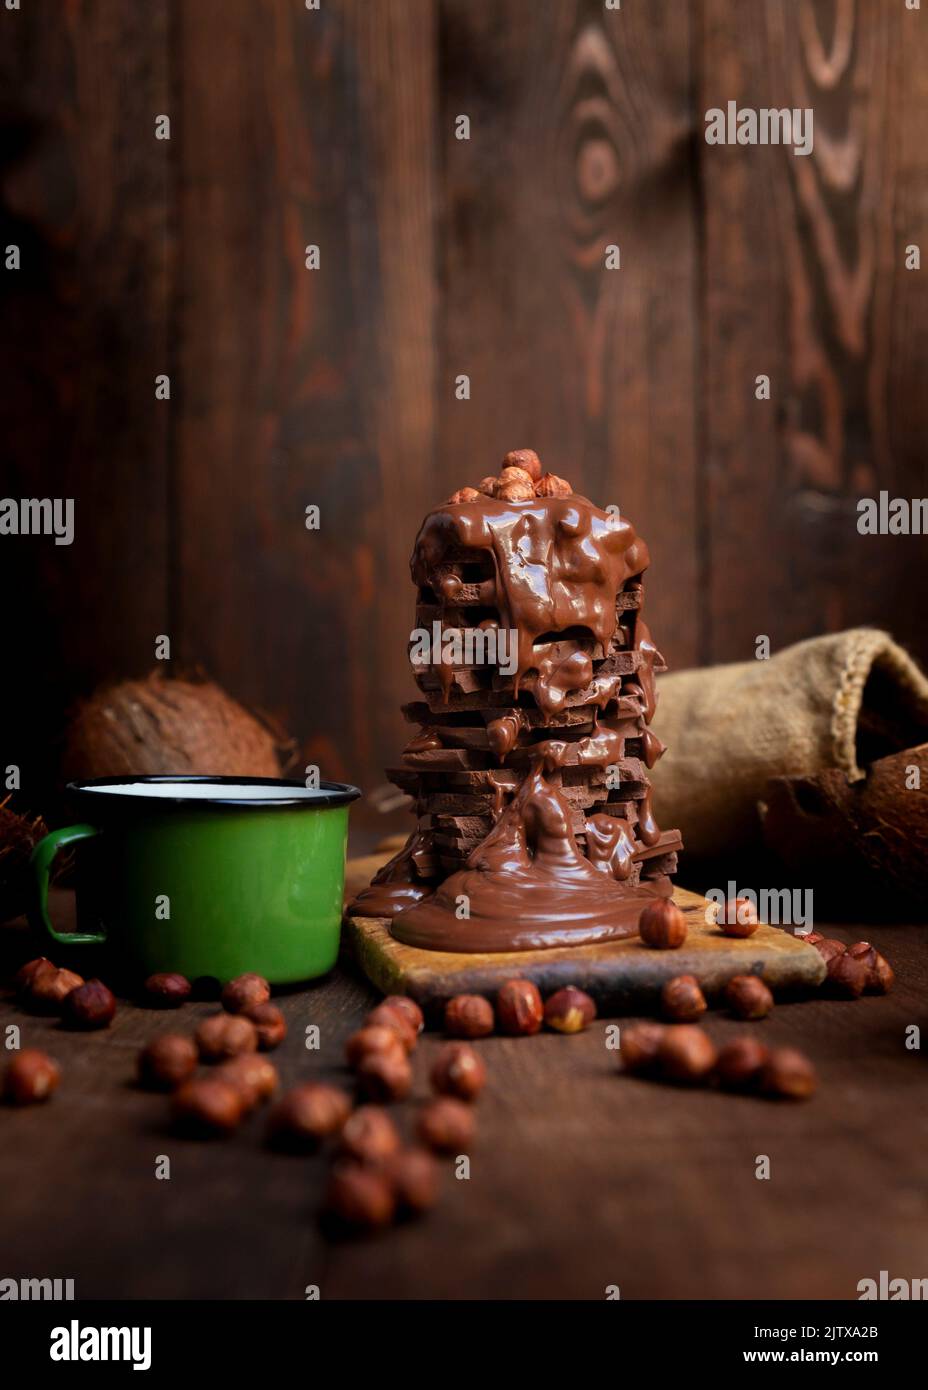 Hot chocolate in the mug and stack of chocolate bars with melted chocolate cream dripping over it in the rustic kitchen. Stock Photo